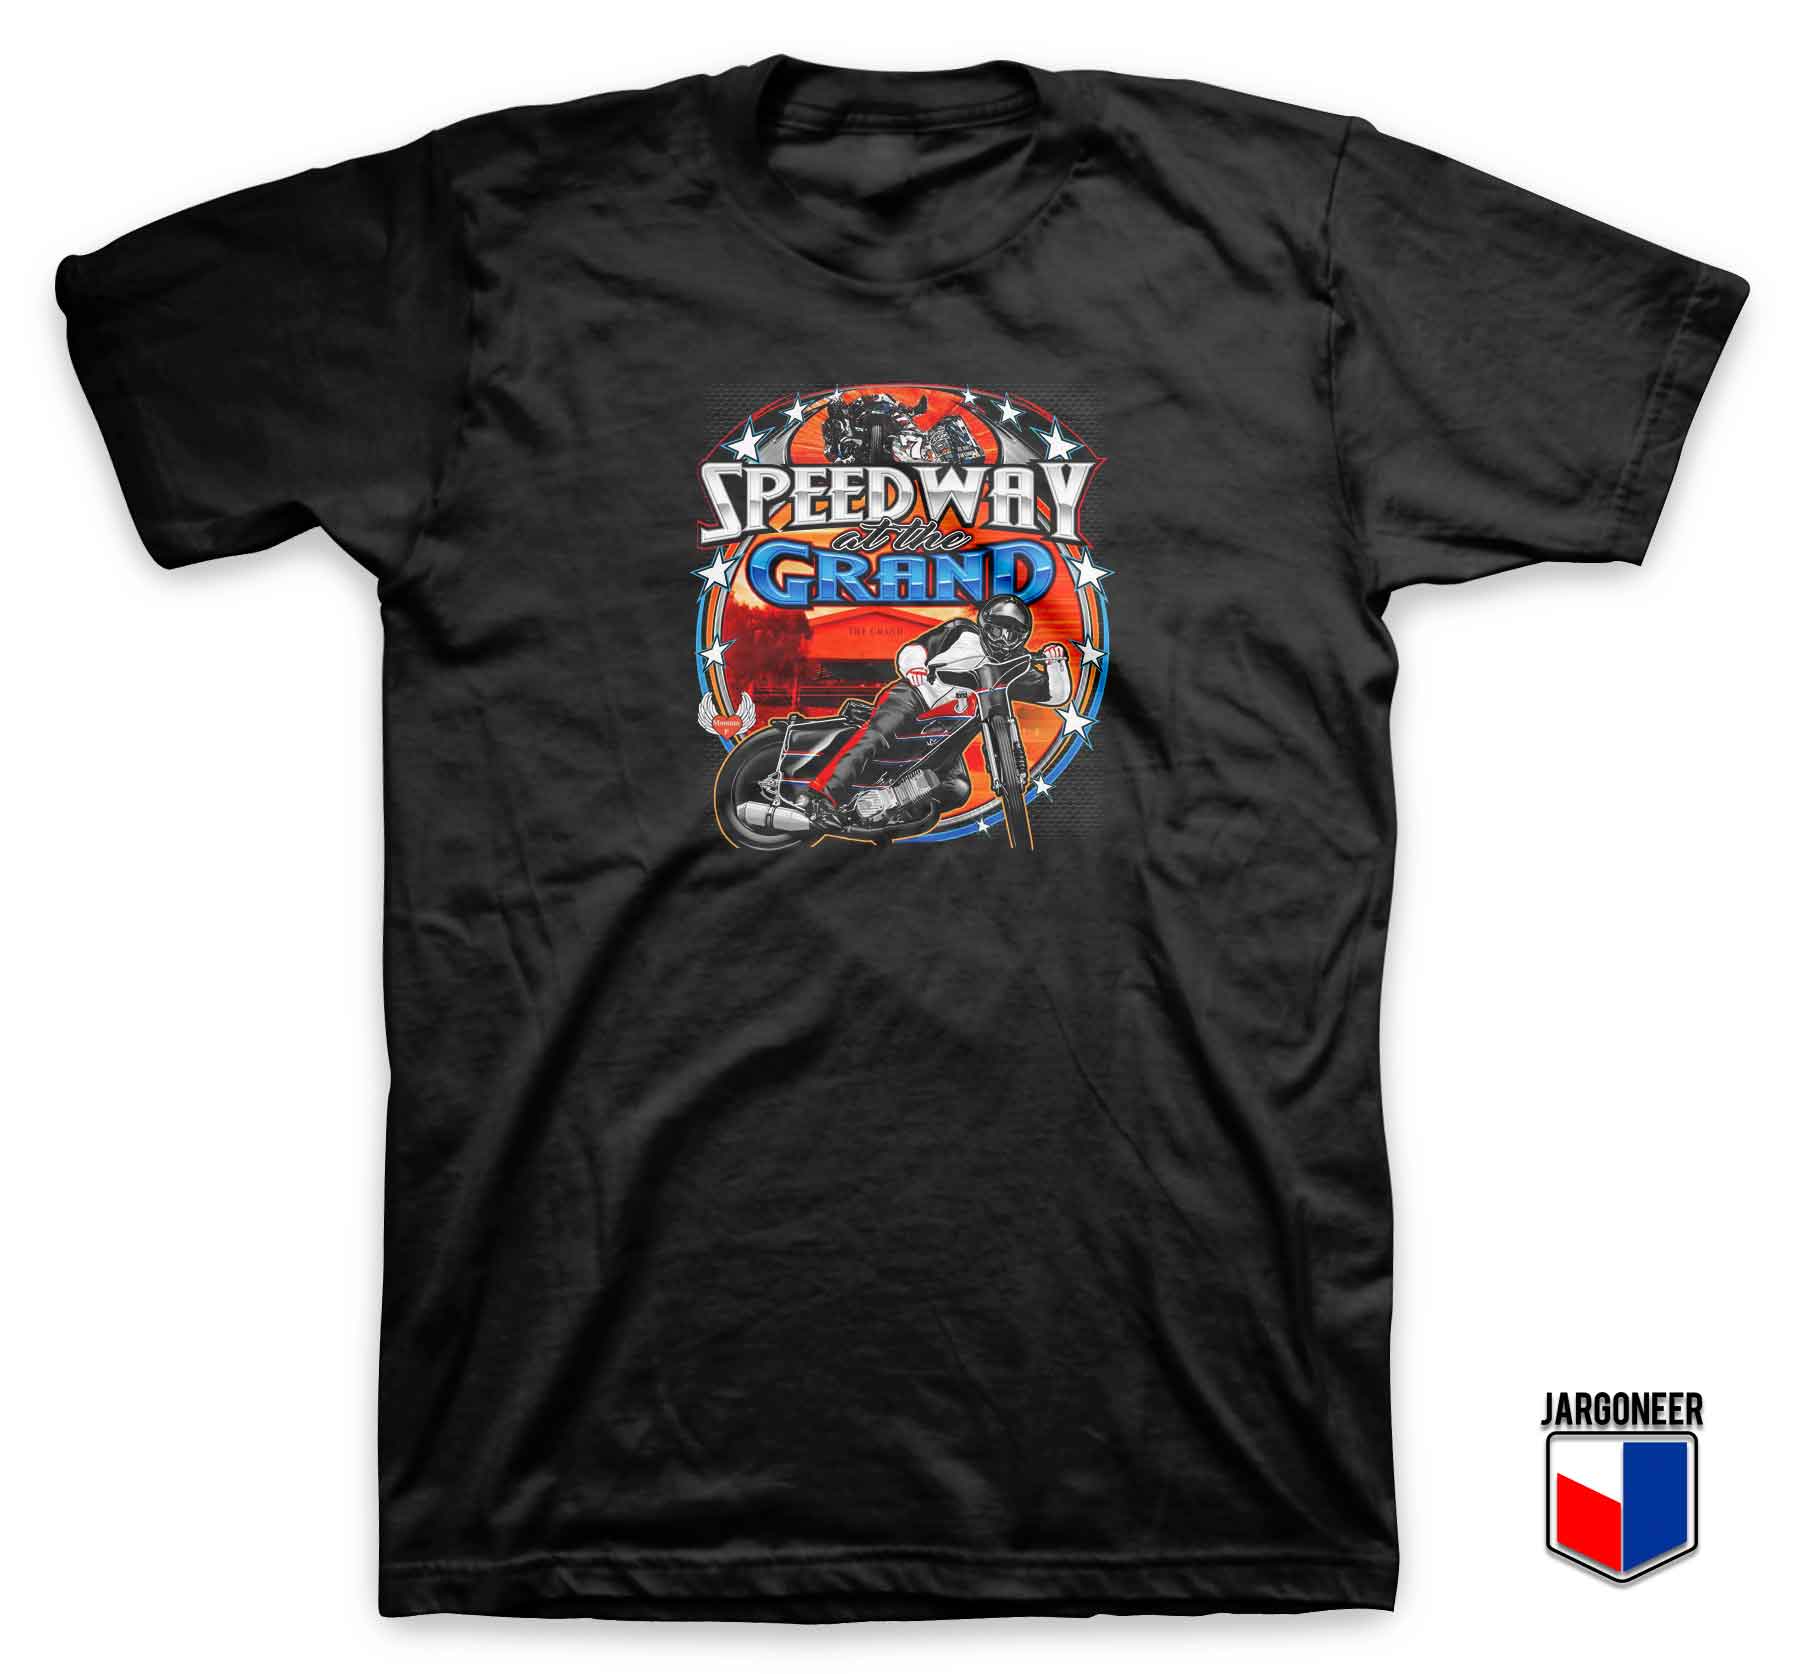 Speedway At The Grand - Shop Unique Graphic Cool Shirt Designs